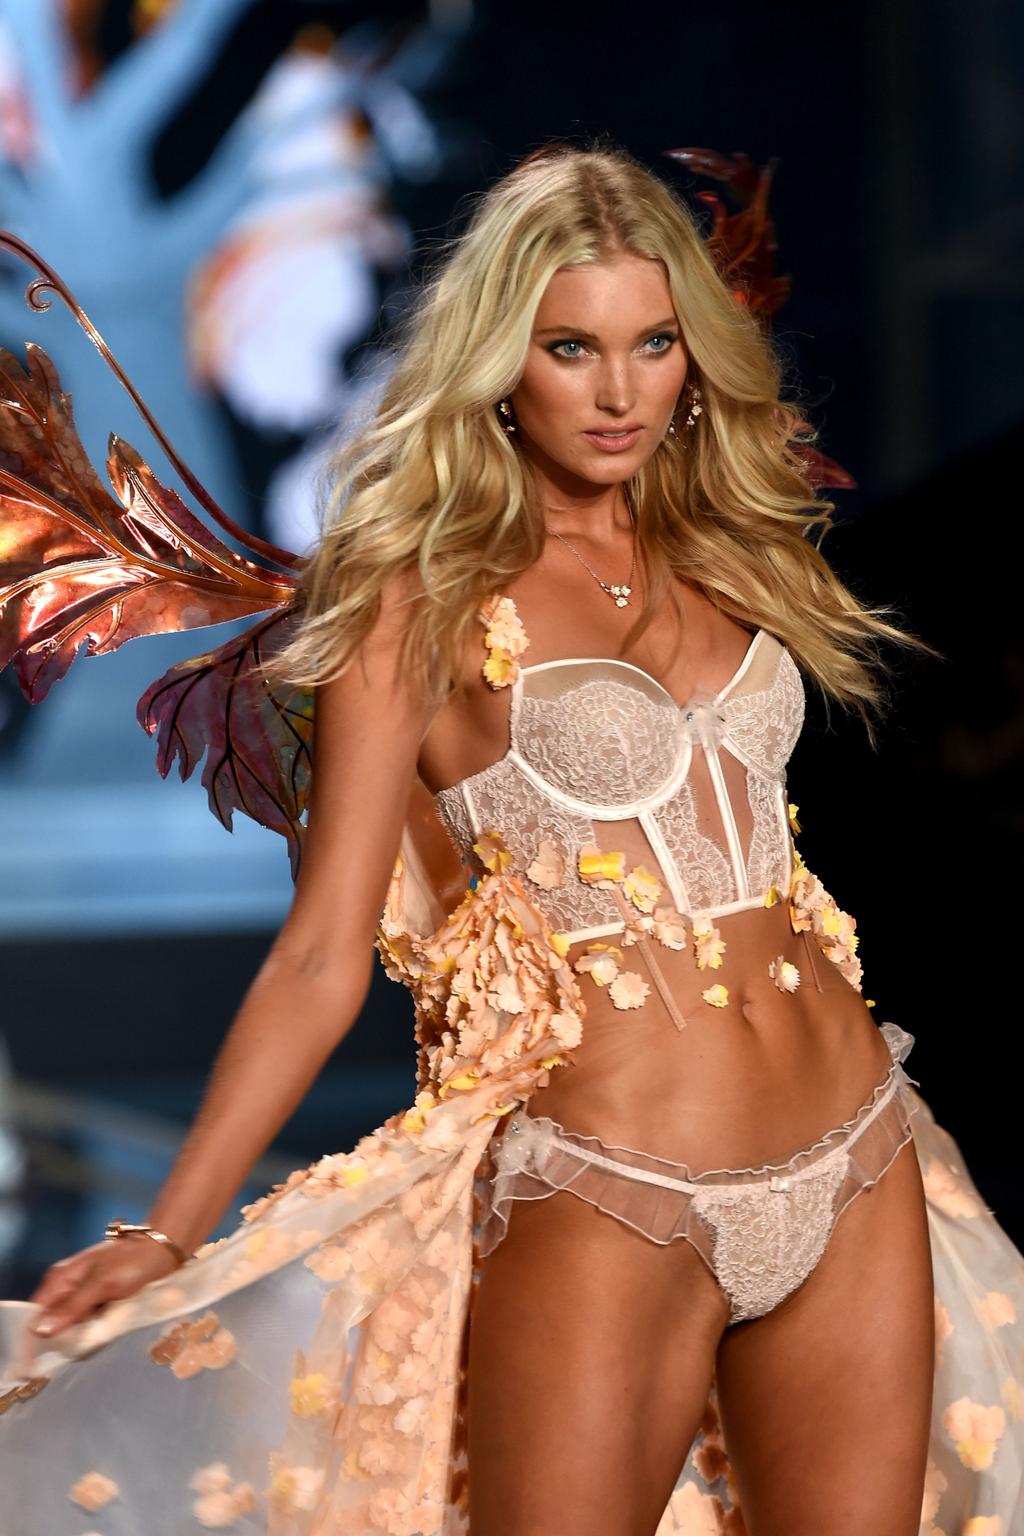 How to work out like a Victoria's Secret Angel